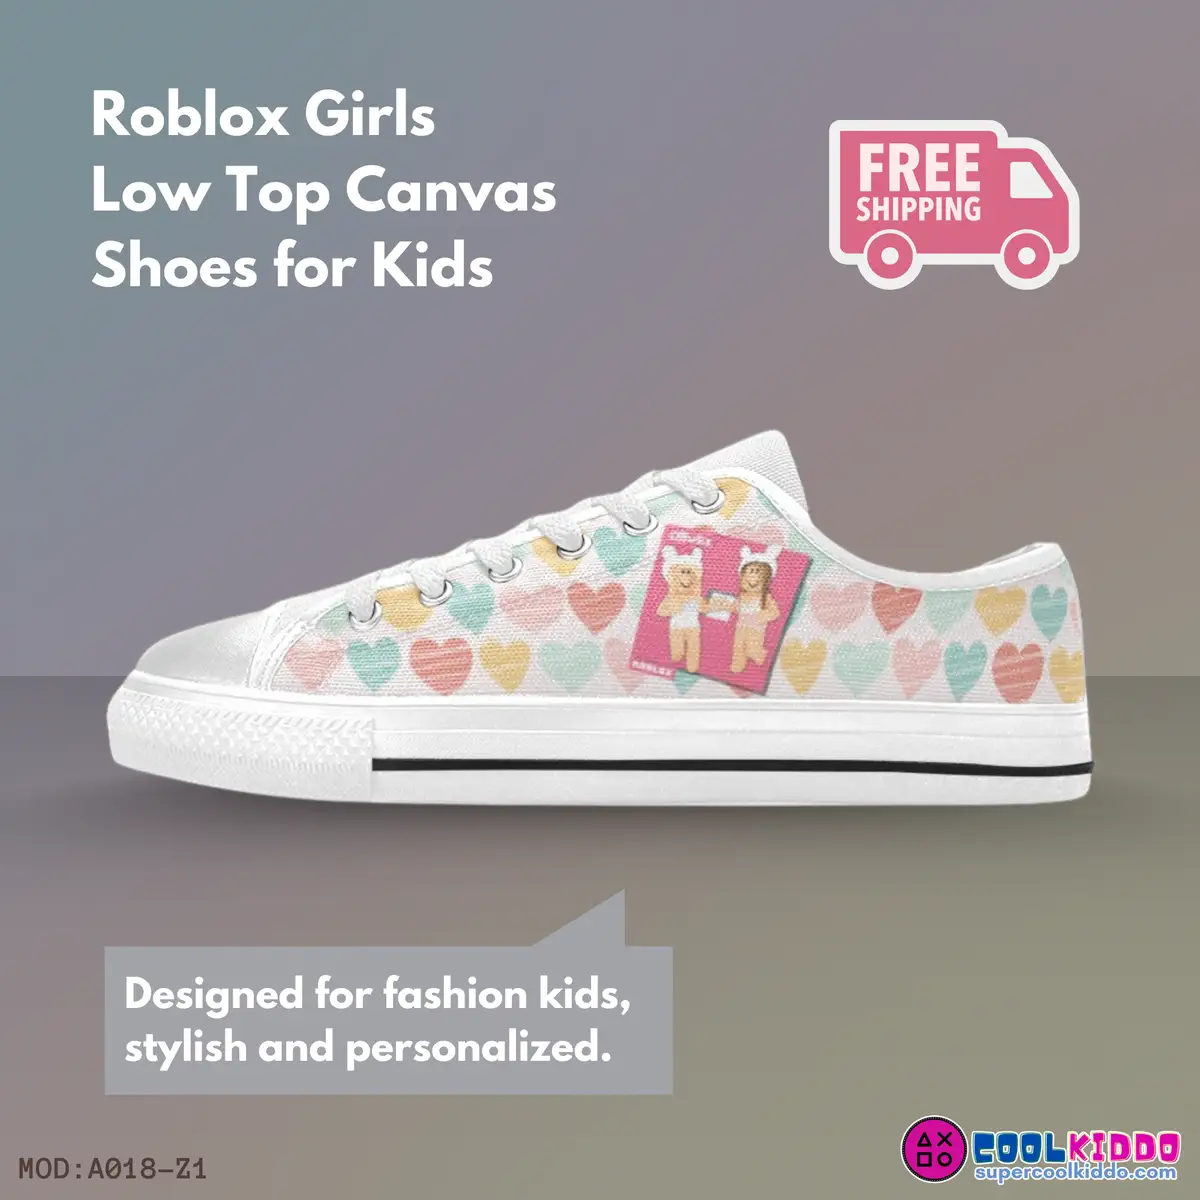 Roblox Girls Heartbeat, Low-Top Sneakers, Roblox Print Shoes Cool Kiddo 12